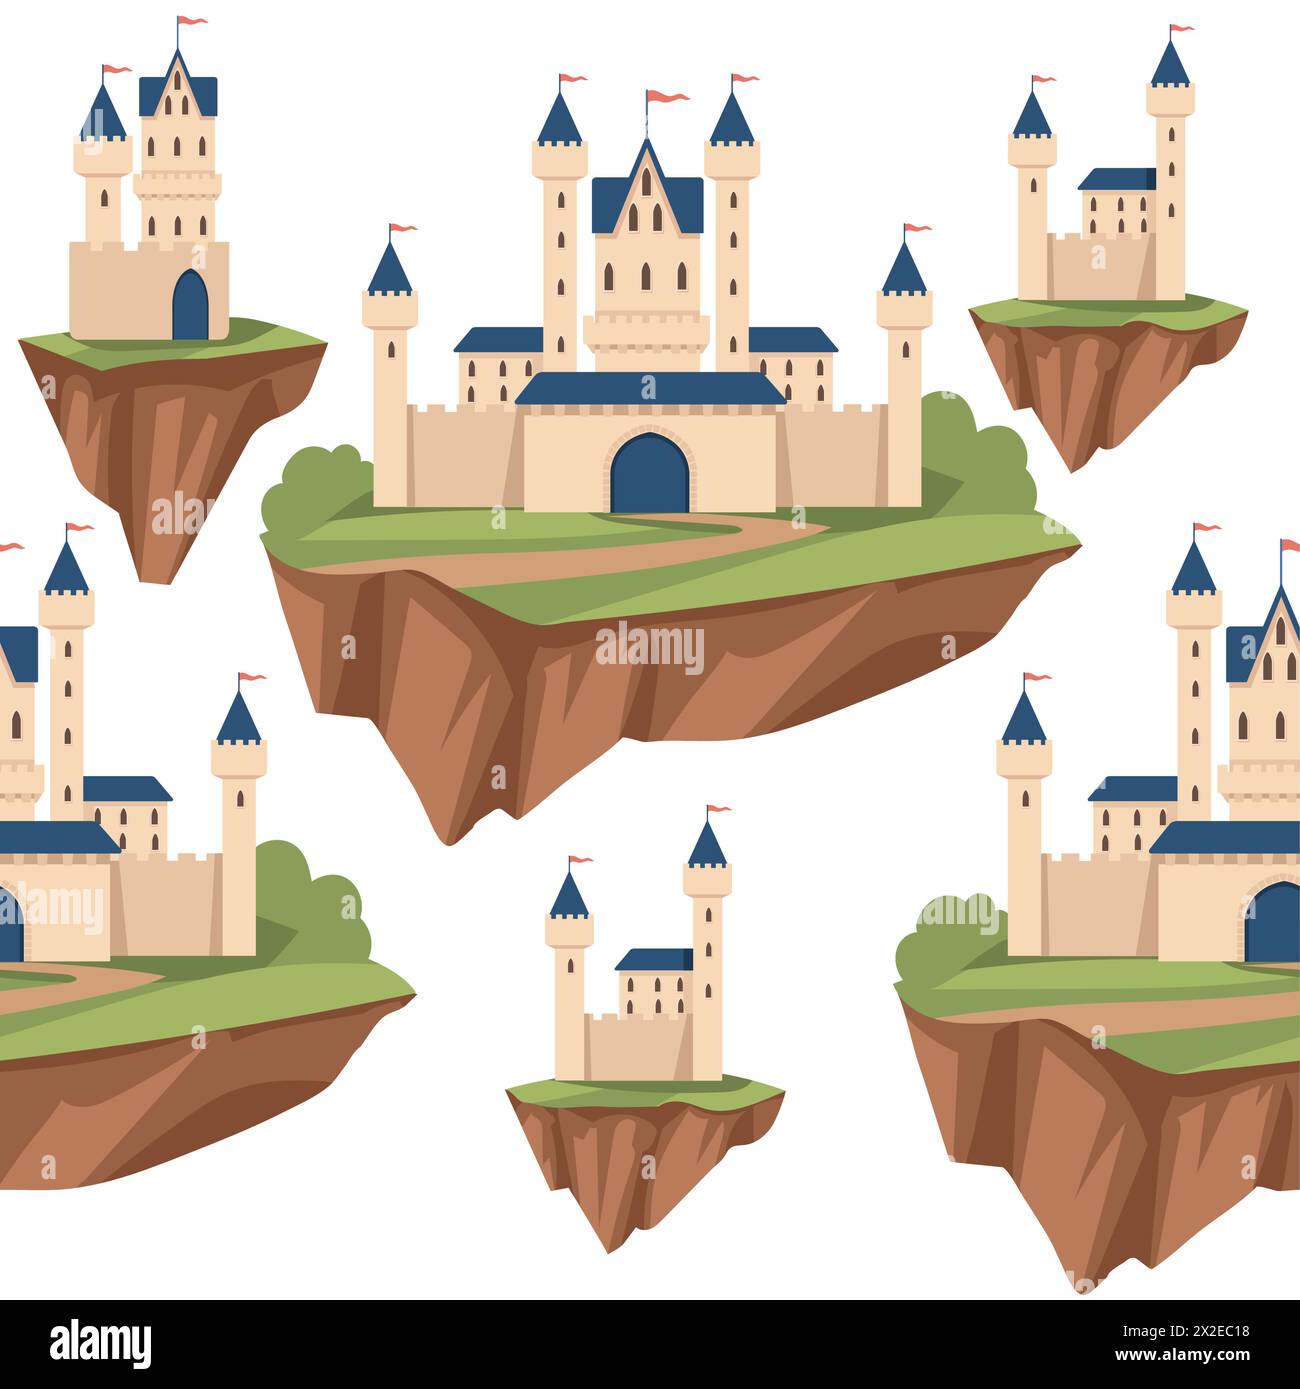 Seamless pattern of fantasy medieval stone castle with towers gate floating in the sky on big piece of ground vector illustration on white background Stock Vector